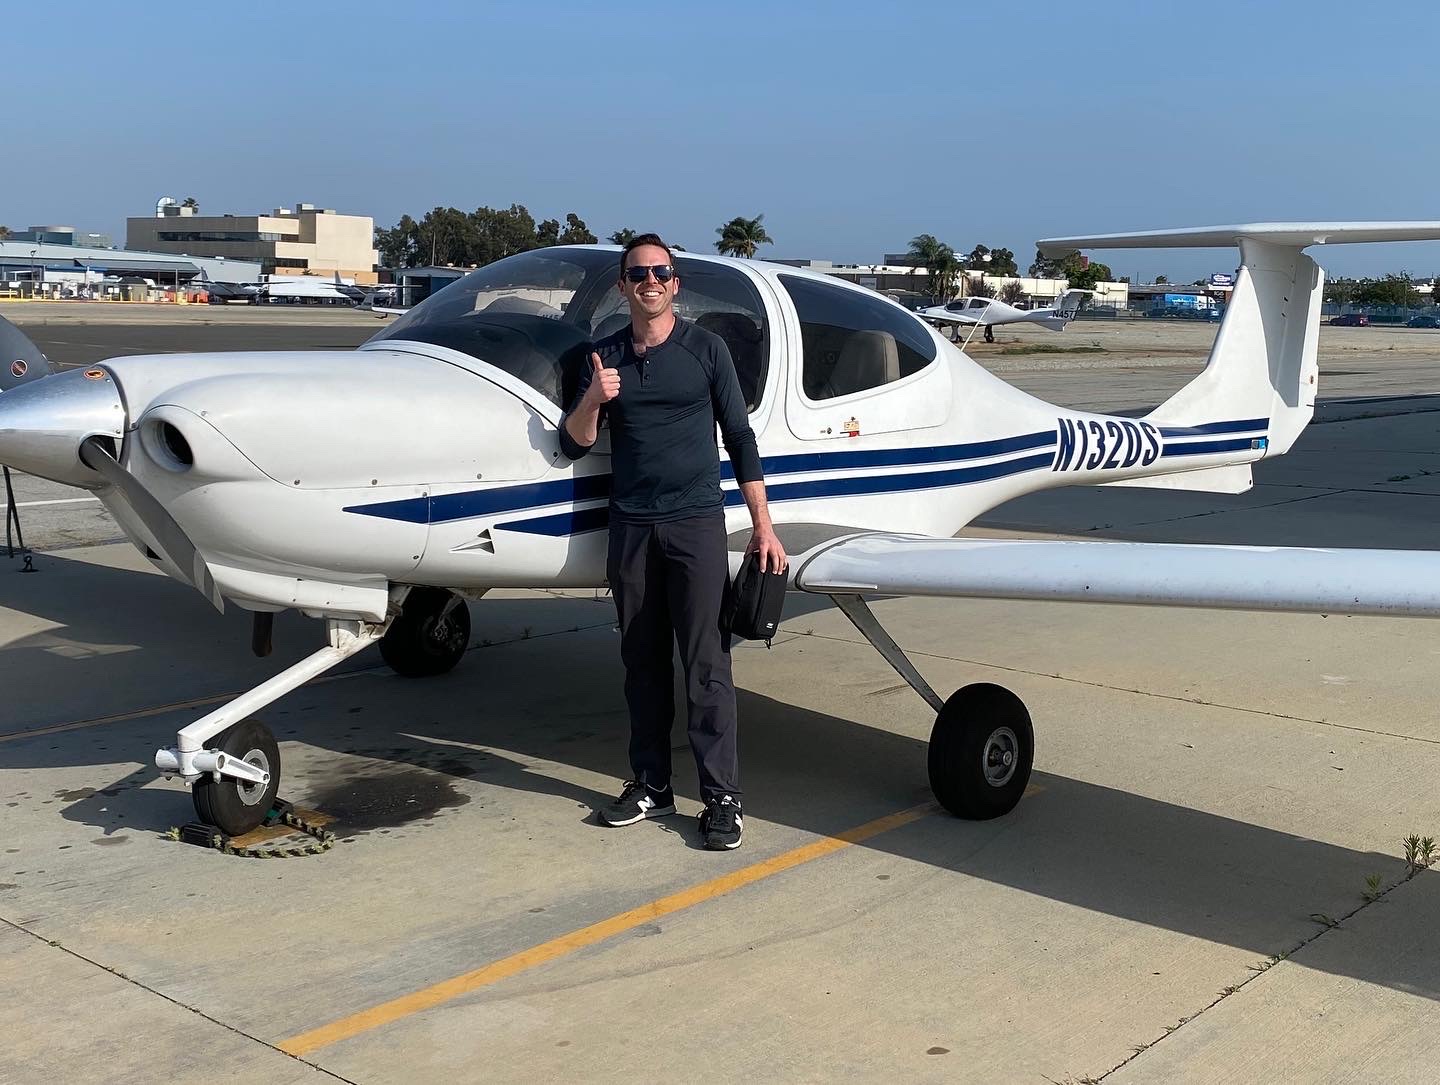 The author in front of his training airplane, having just received his private pilot license